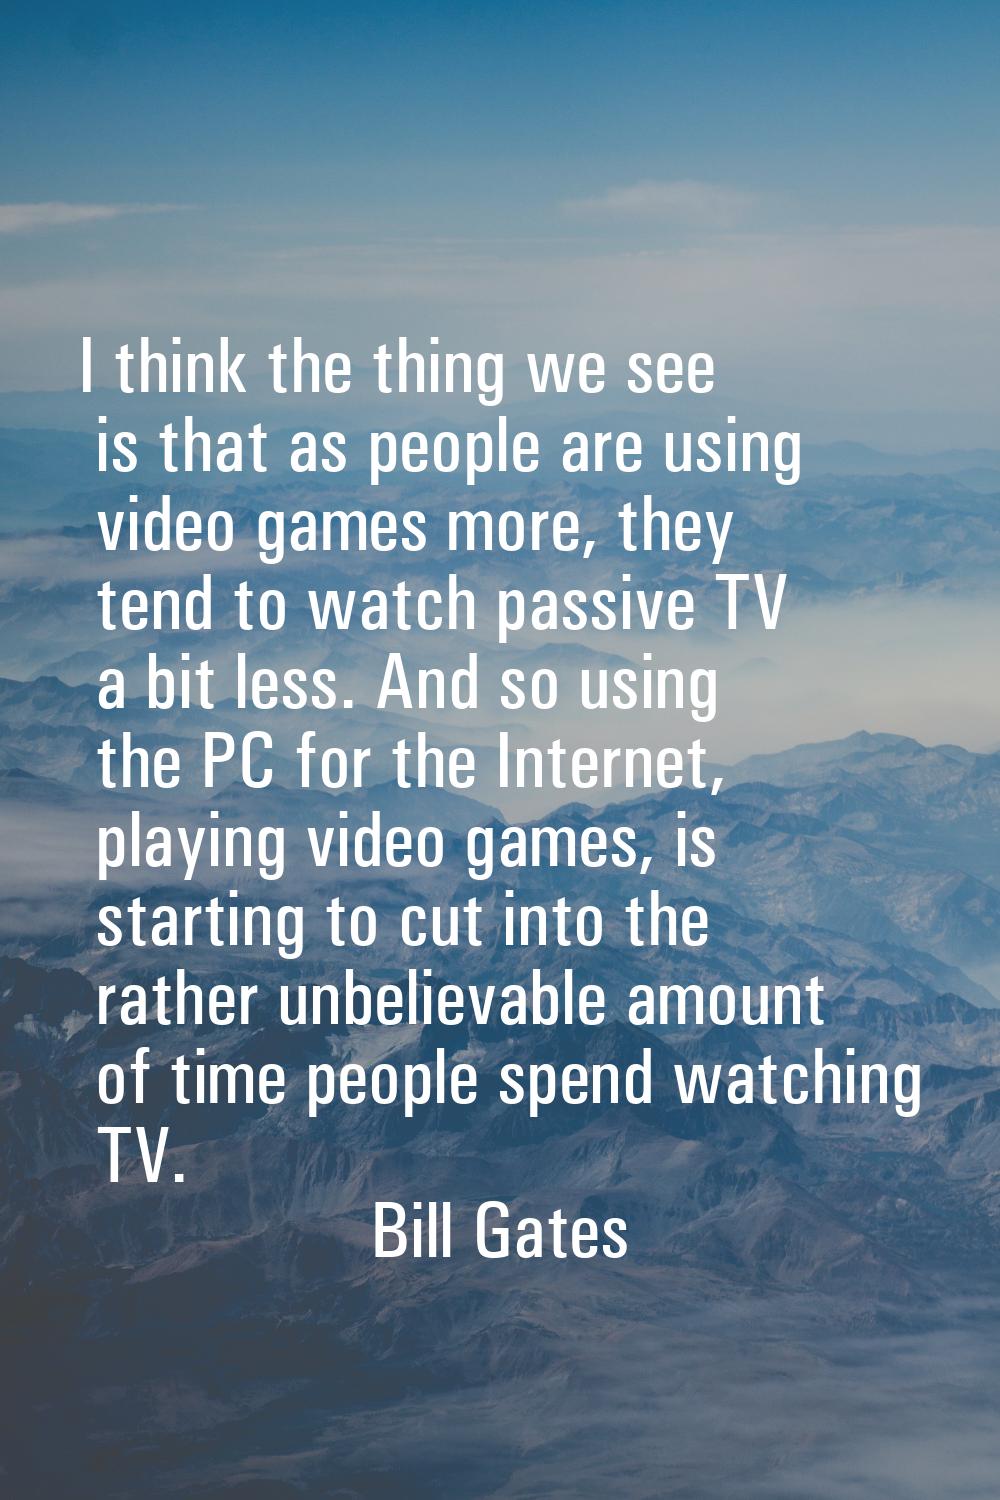 I think the thing we see is that as people are using video games more, they tend to watch passive T